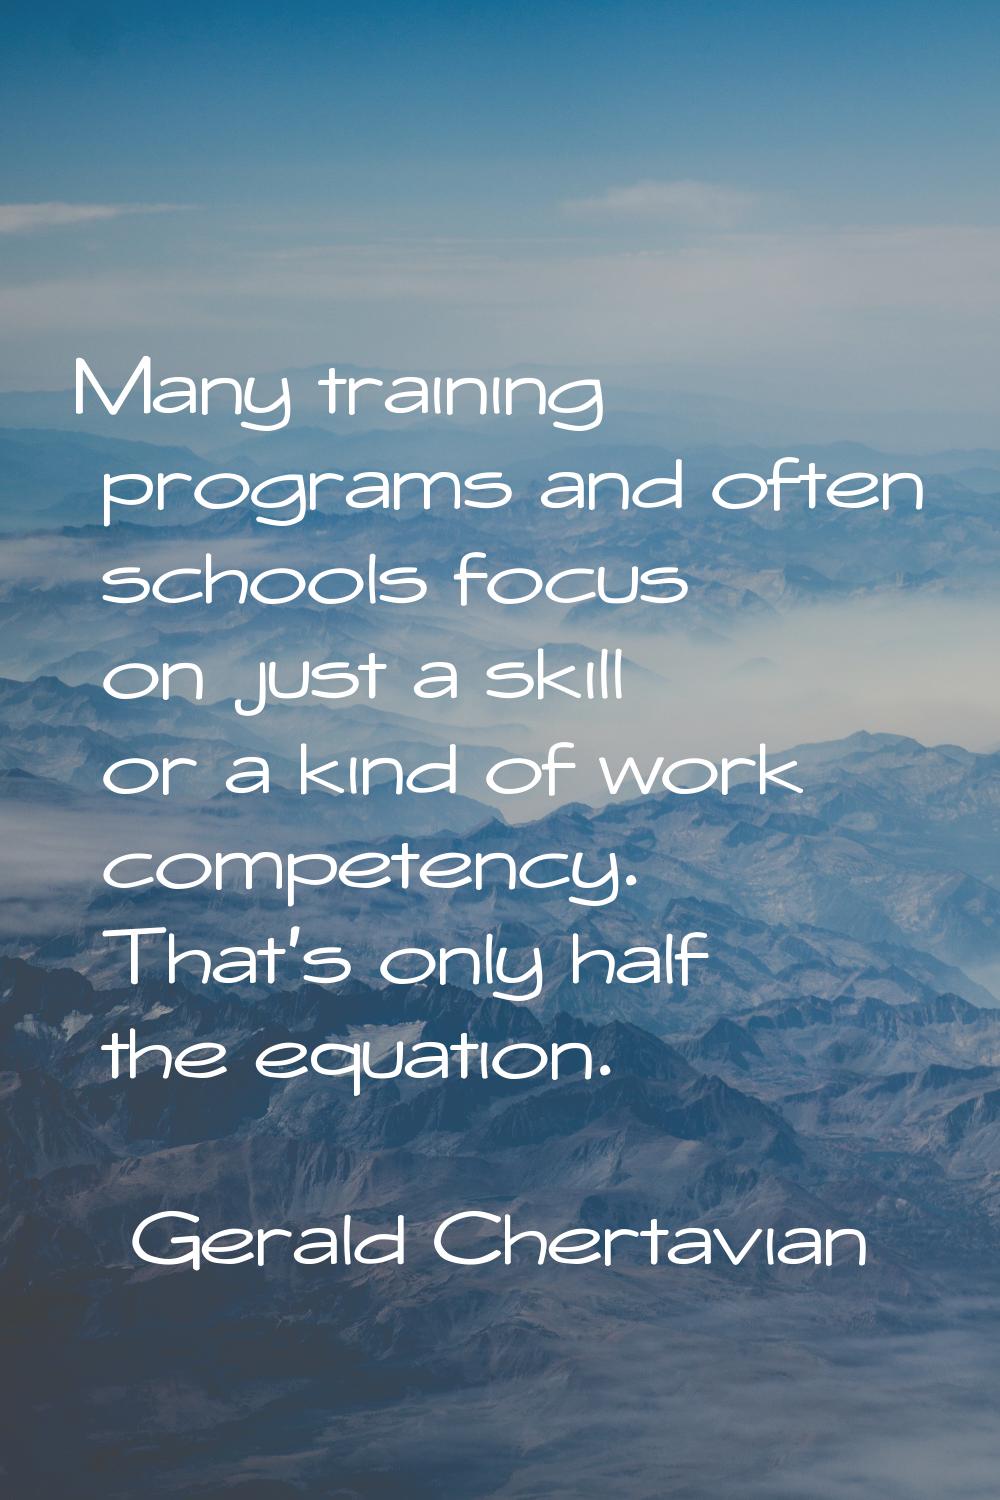 Many training programs and often schools focus on just a skill or a kind of work competency. That's